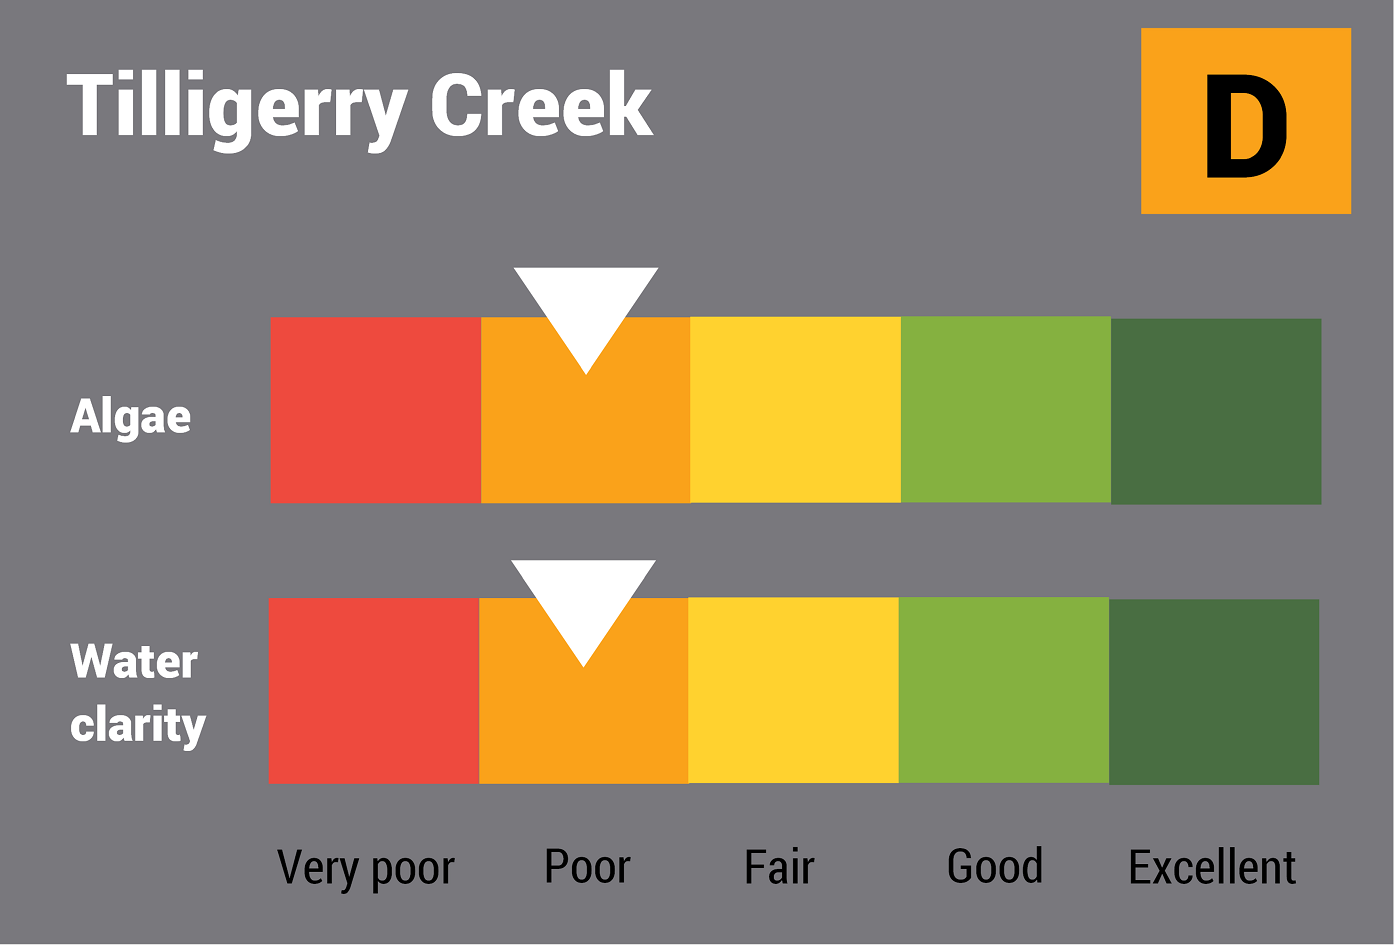 Tilligerry Creek water quality report card for algae and water clarity showing colour-coded ratings (red, orange, yellow, light green and dark green, which represent very poor, poor, fair, good and excellent, respectively). Algae is rated 'poor' and water clarity is rated 'poor' giving an overall rating of 'very poor' or 'D'.